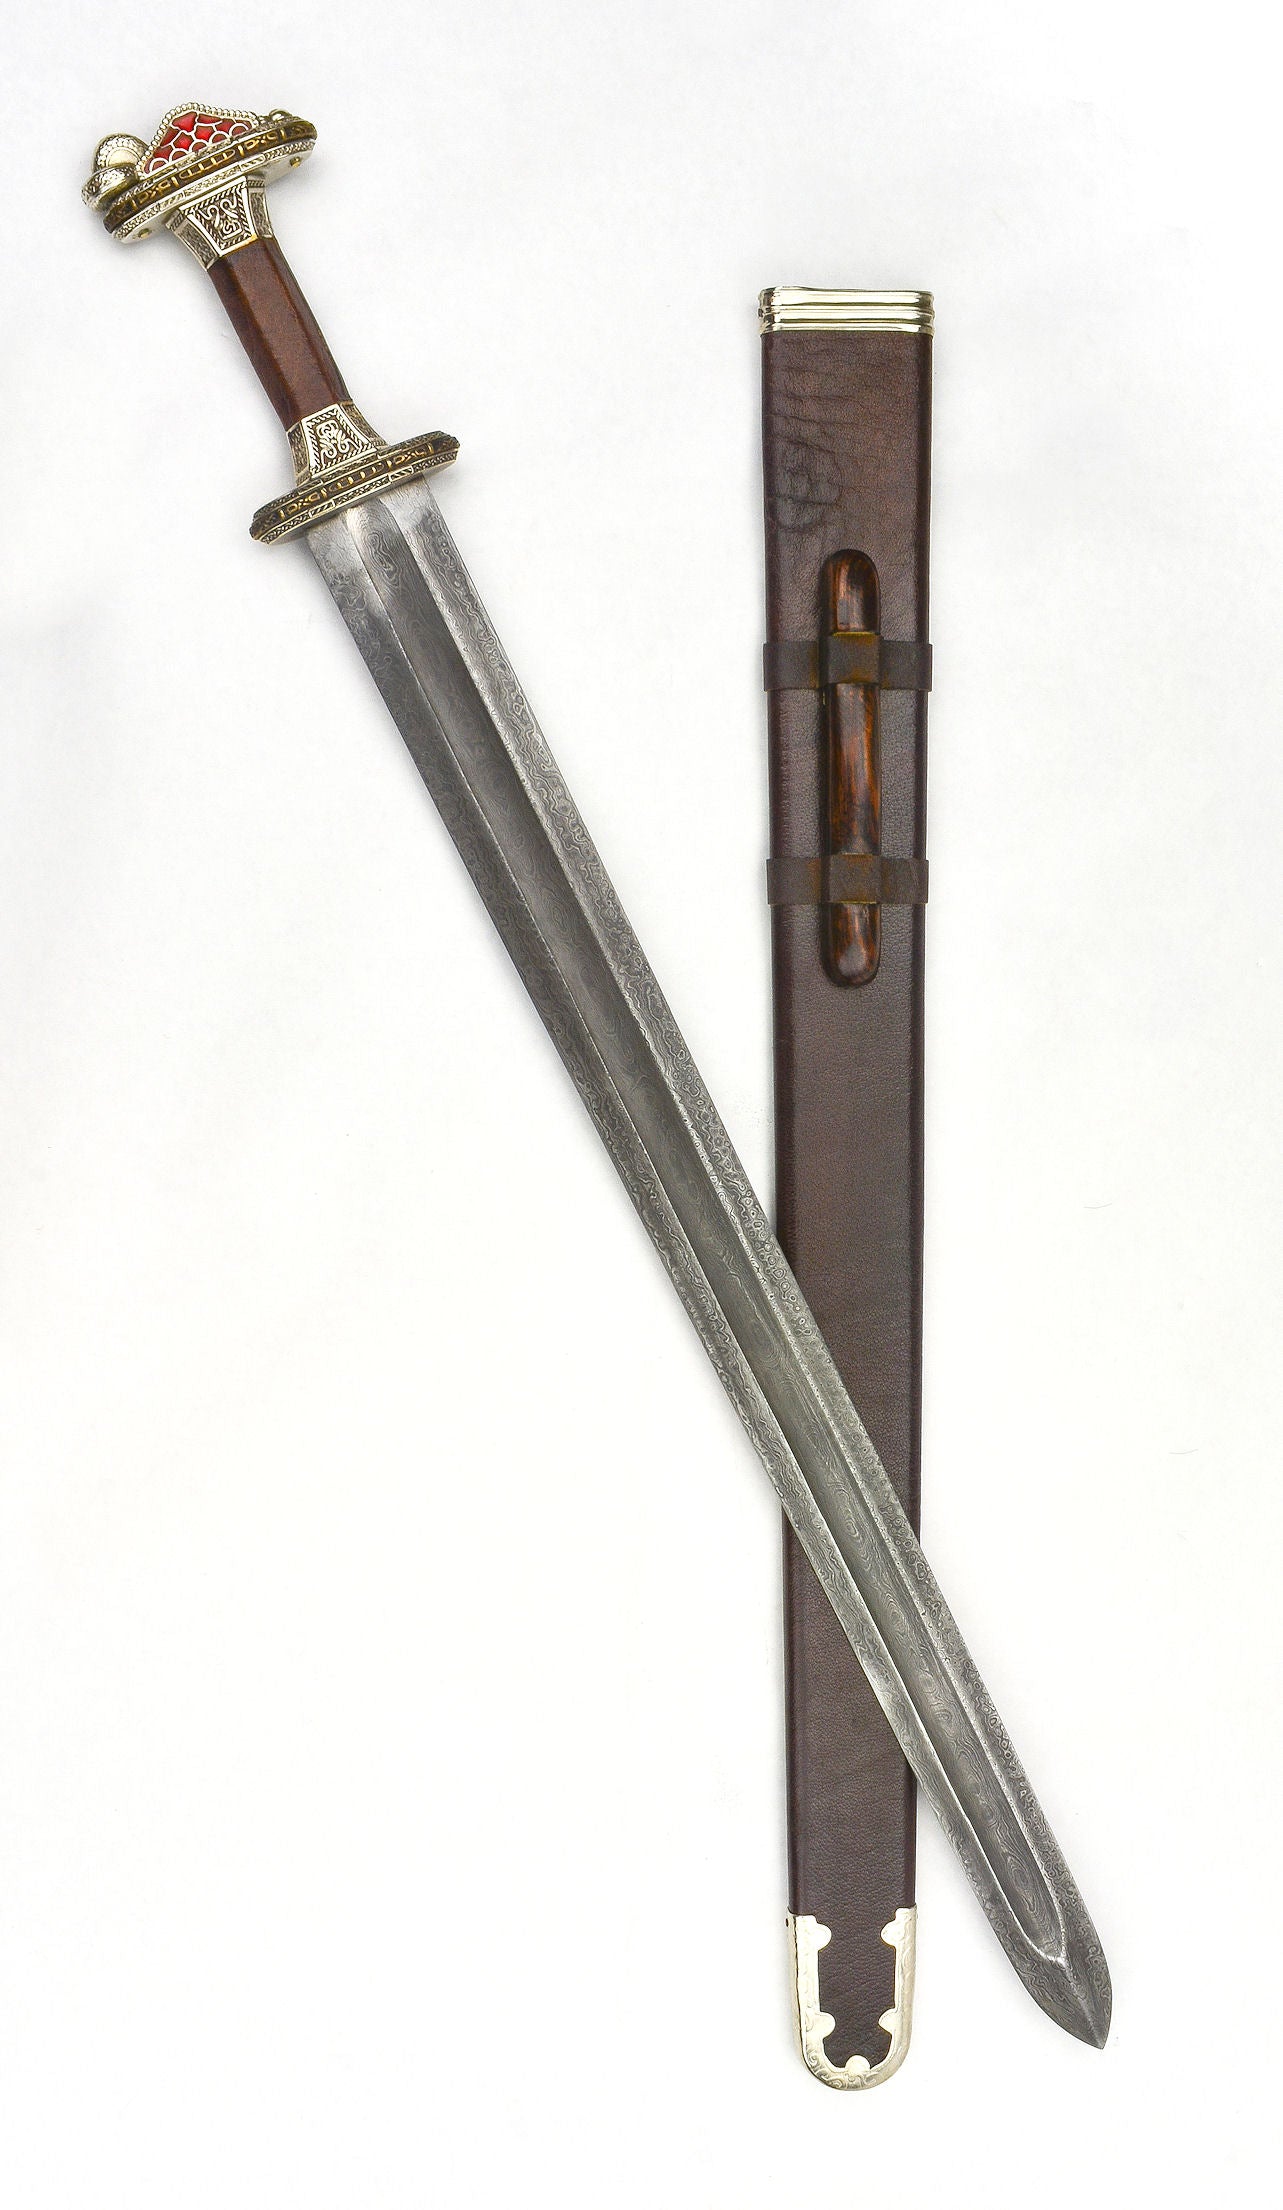 Scandinavian Vendel Chieftain's Sword with Damascus Blade - Tin Plated with Brass Hilt Accents